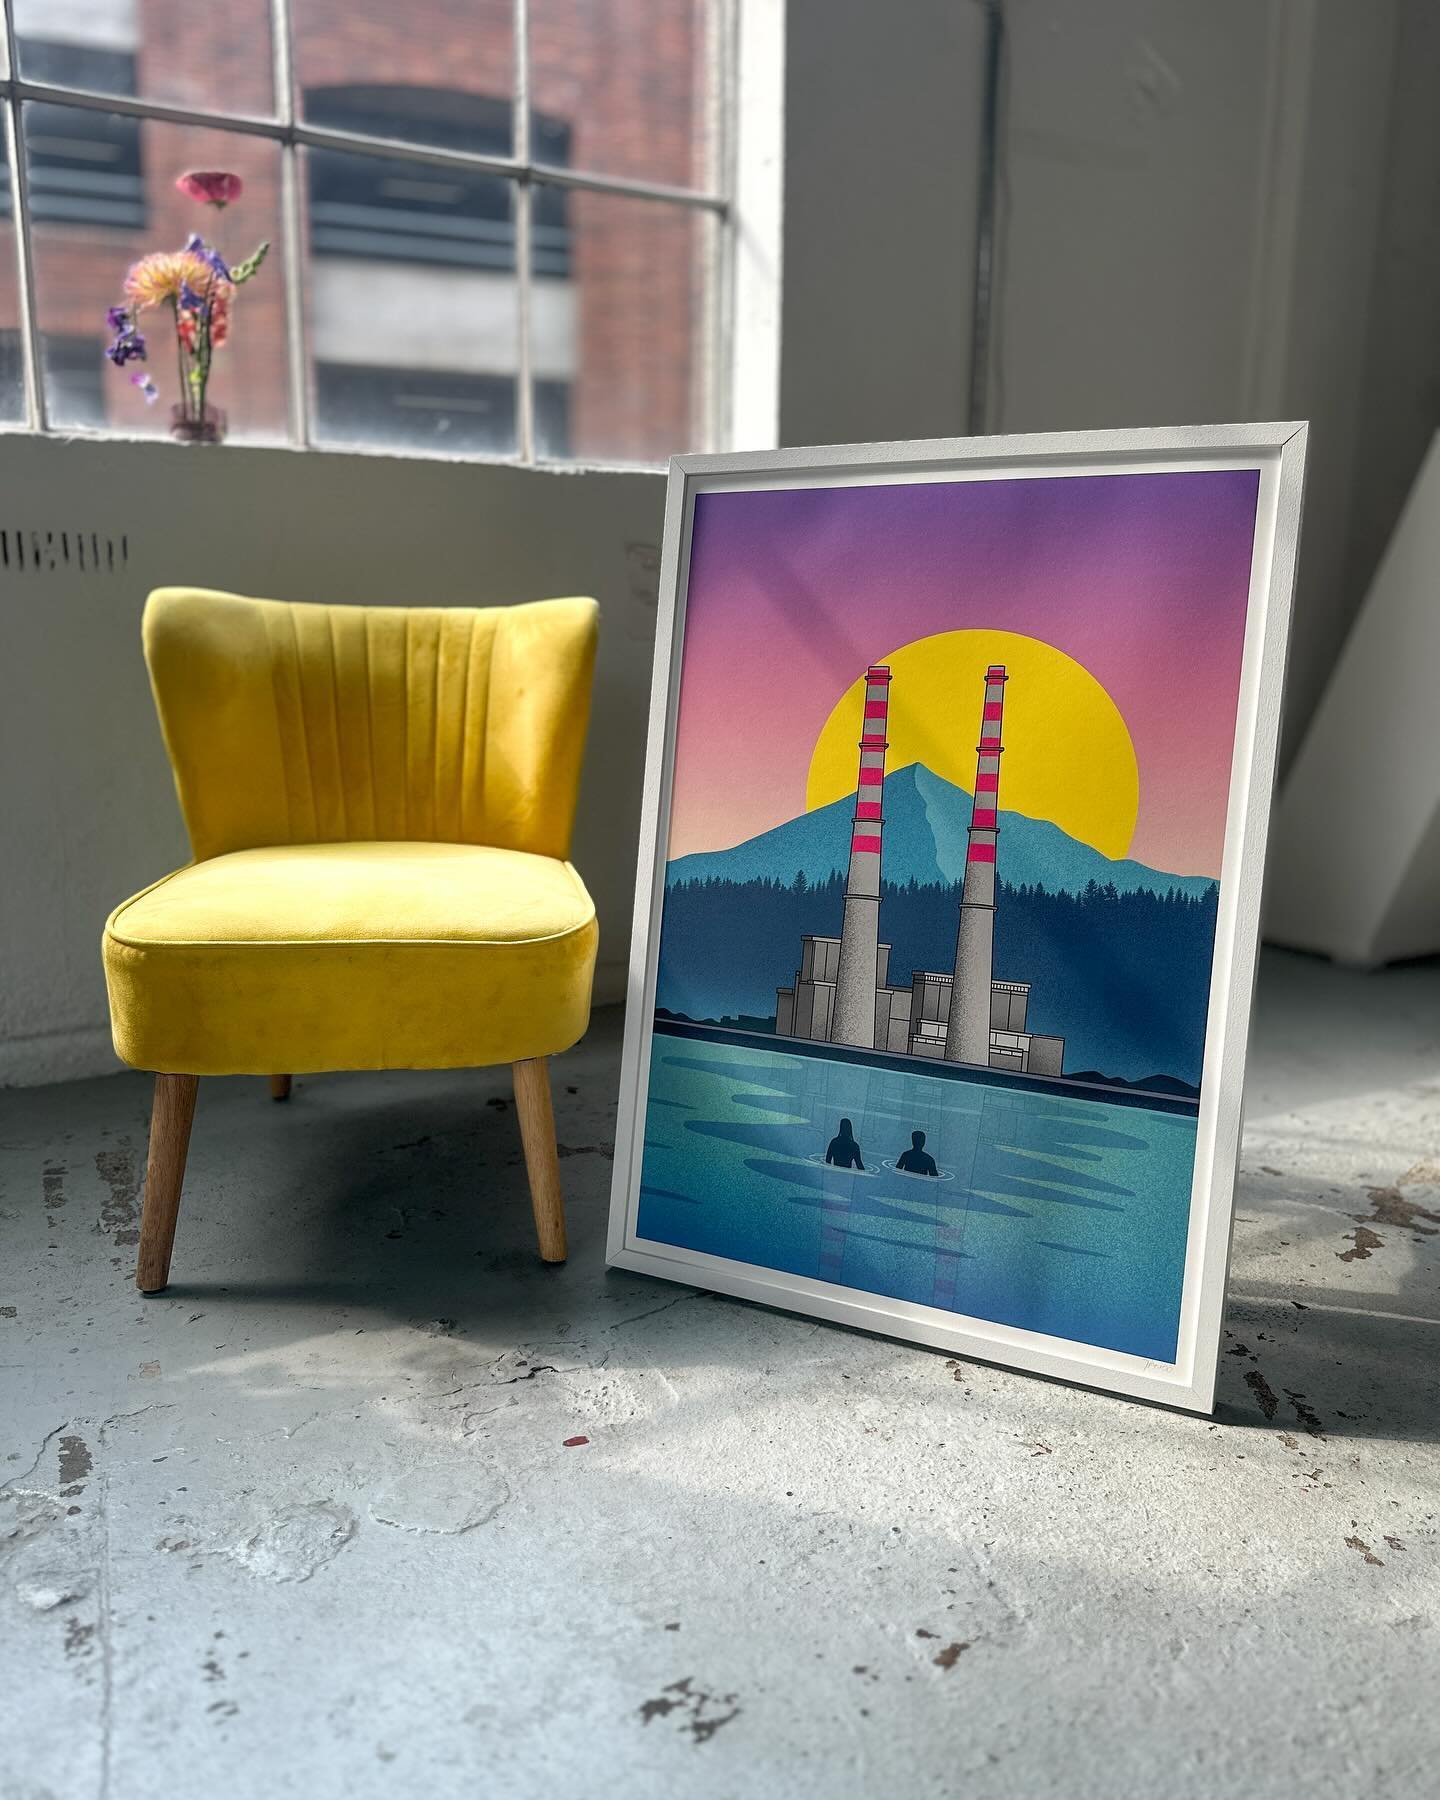 ☀️ Our number one print over the last few weeks. Love the sunny charm of this shot, with the yellow chair paired perfectly with our Poolbeg Swimmers print! 🩷🩷🩷
.
.
.
.
.
.
.
.
.
.
.
#showroom #illust #illustration  #printlife #printmaker #printmak